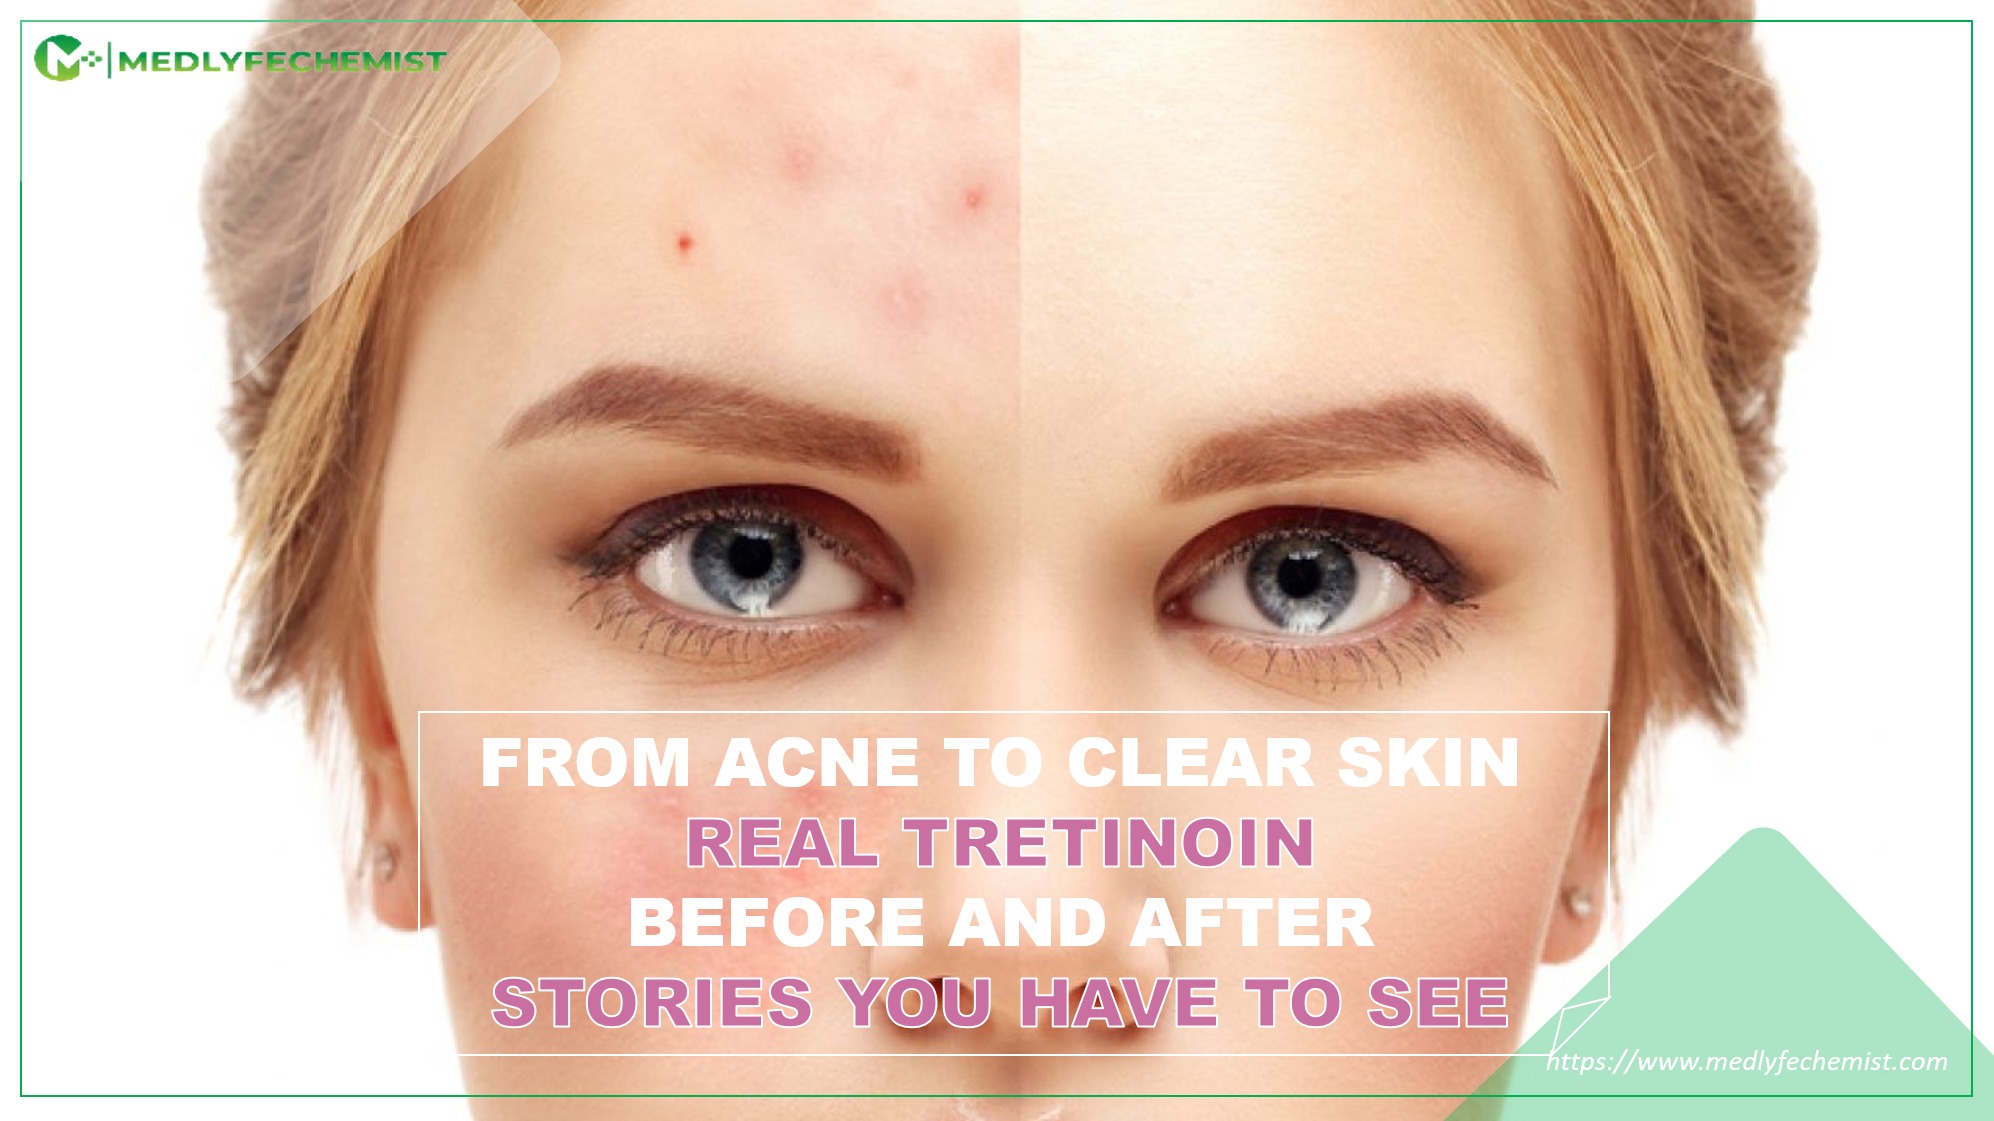 From Acne to Clear Skin: Real Tretinoin before and After Stories You Have to See